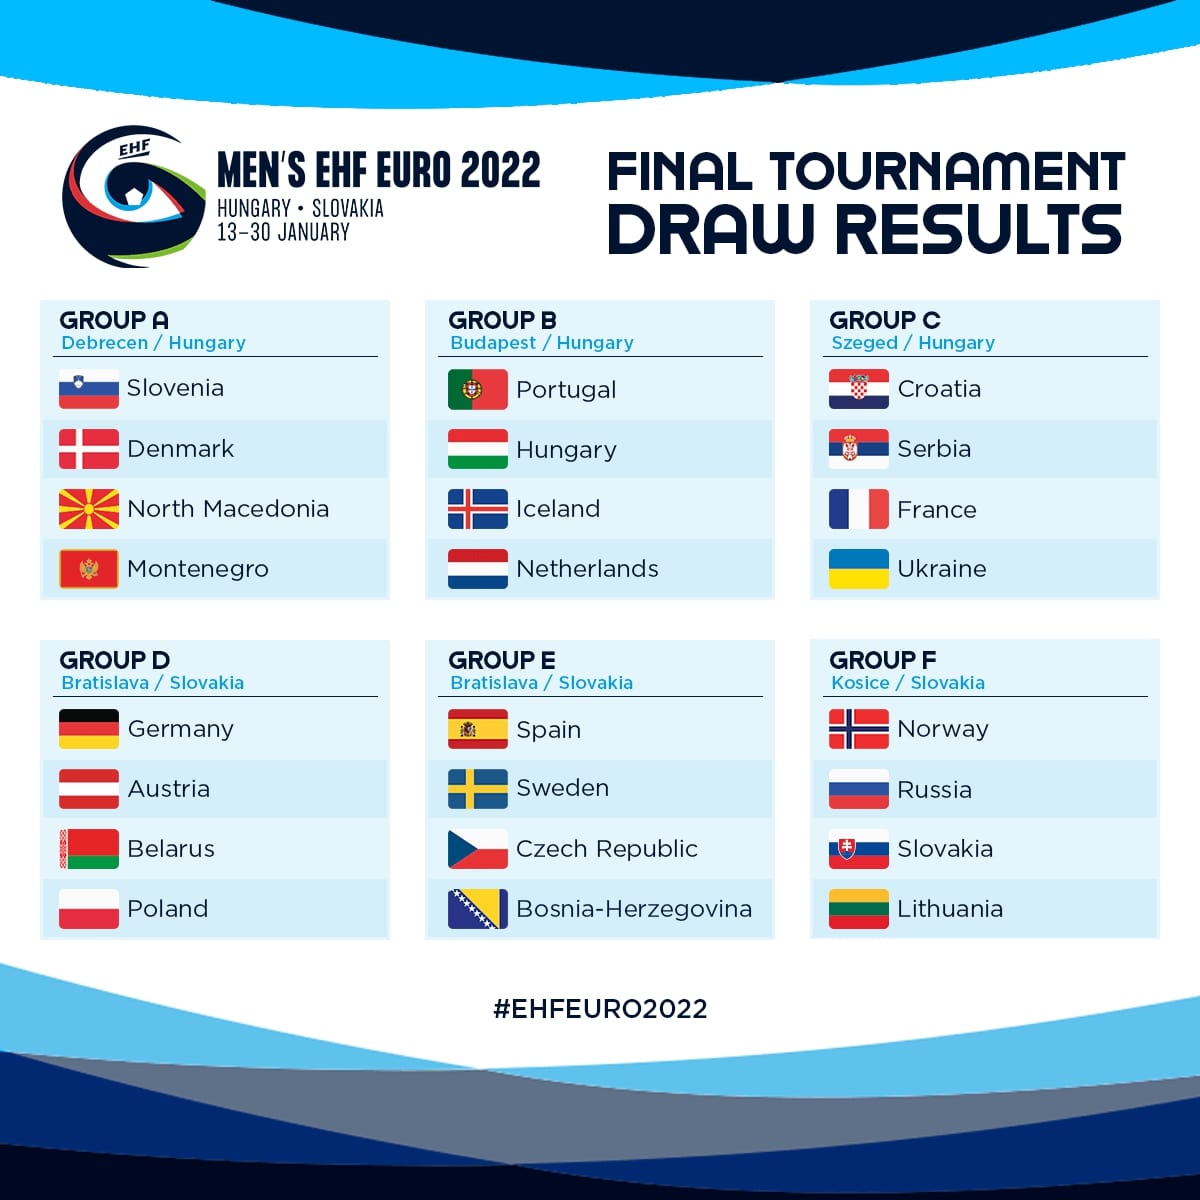 The draw of the EHF EURO 2022 